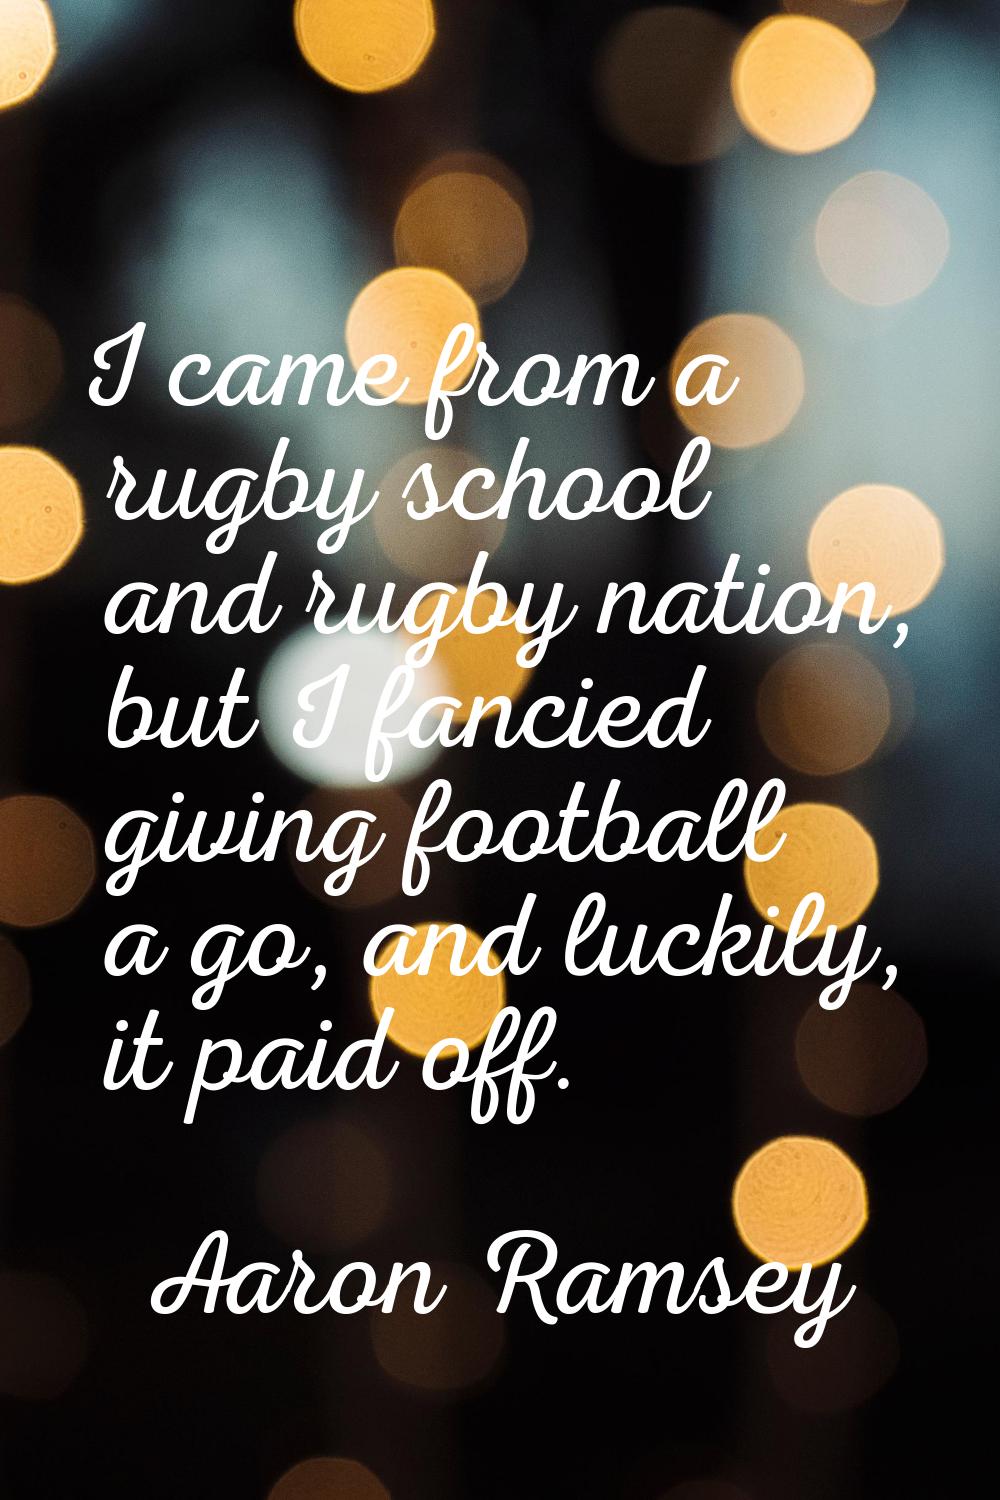 I came from a rugby school and rugby nation, but I fancied giving football a go, and luckily, it pa